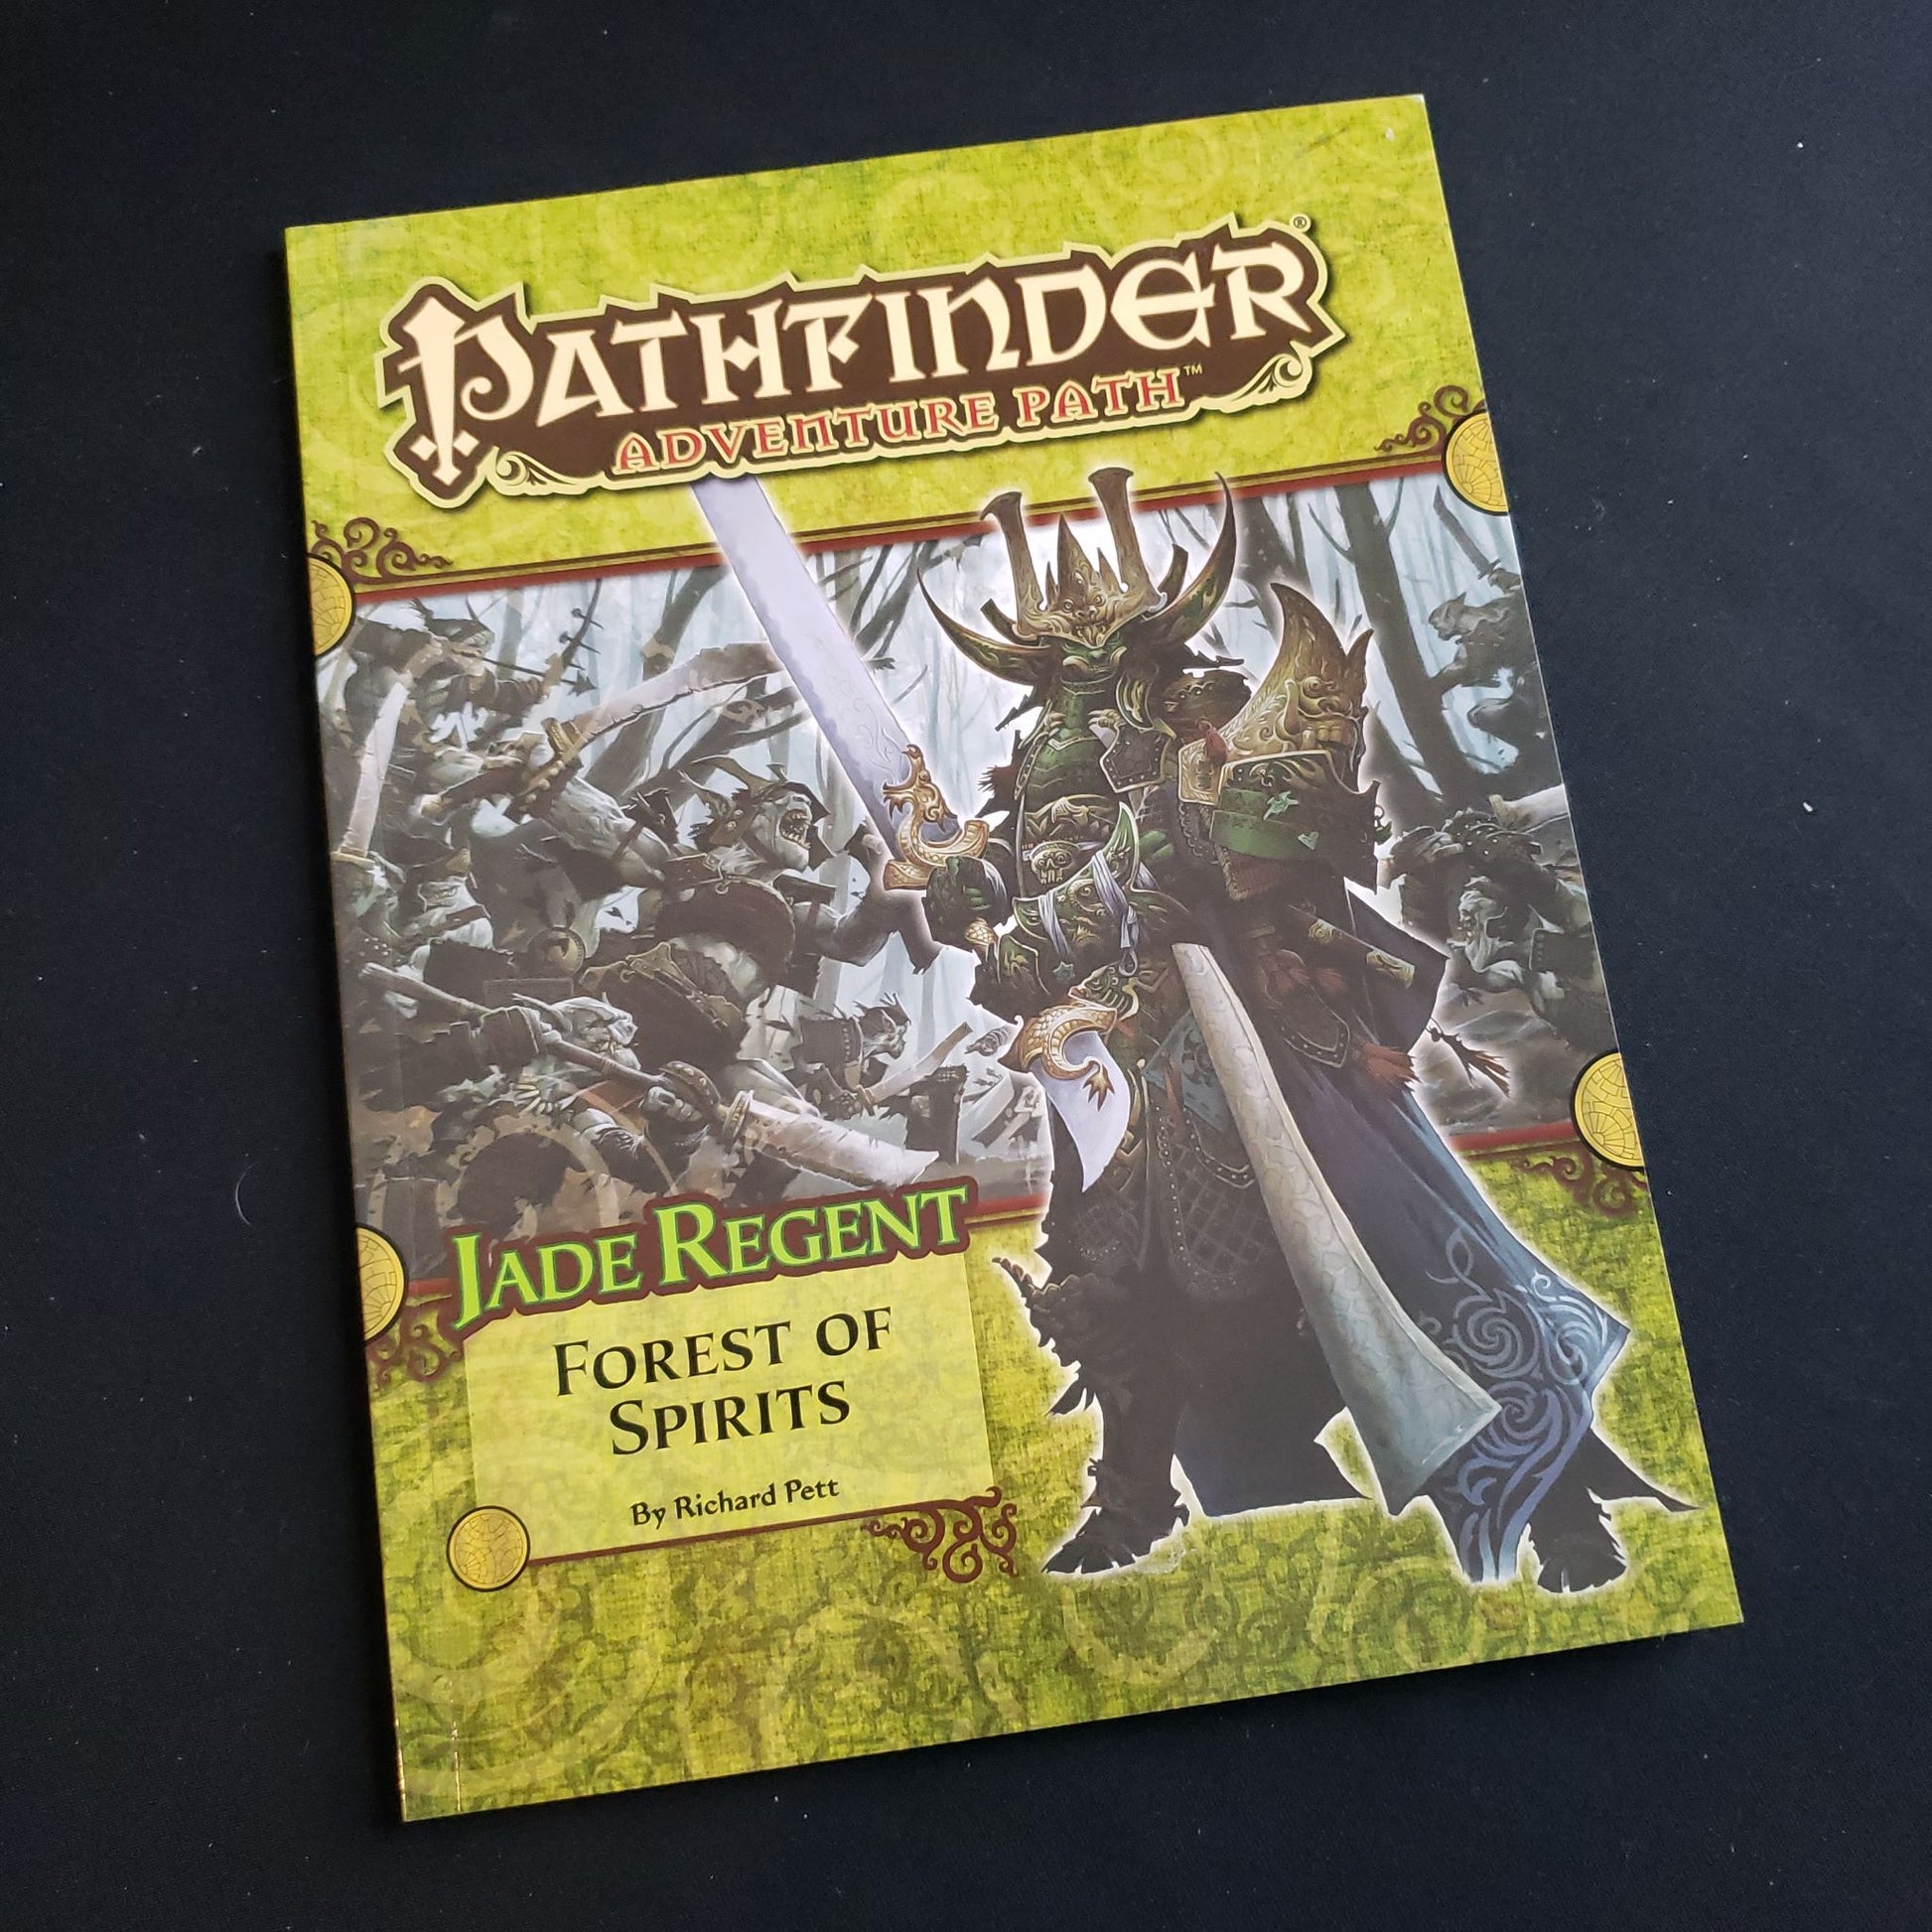 Image shows the front cover of the Forest of Spirits book for the Pathfinder First Edition roleplaying game